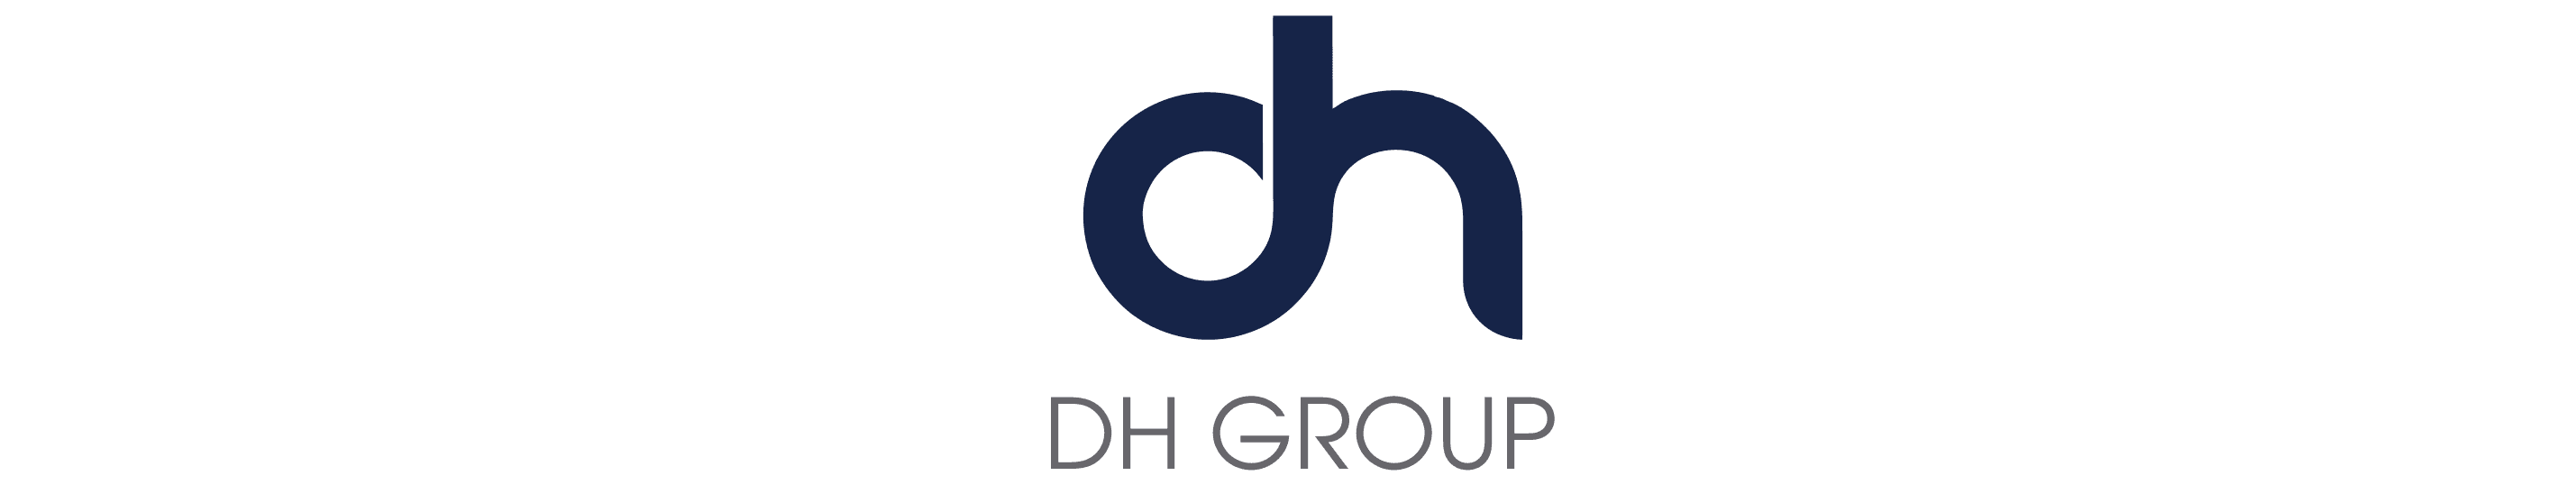 DH Group